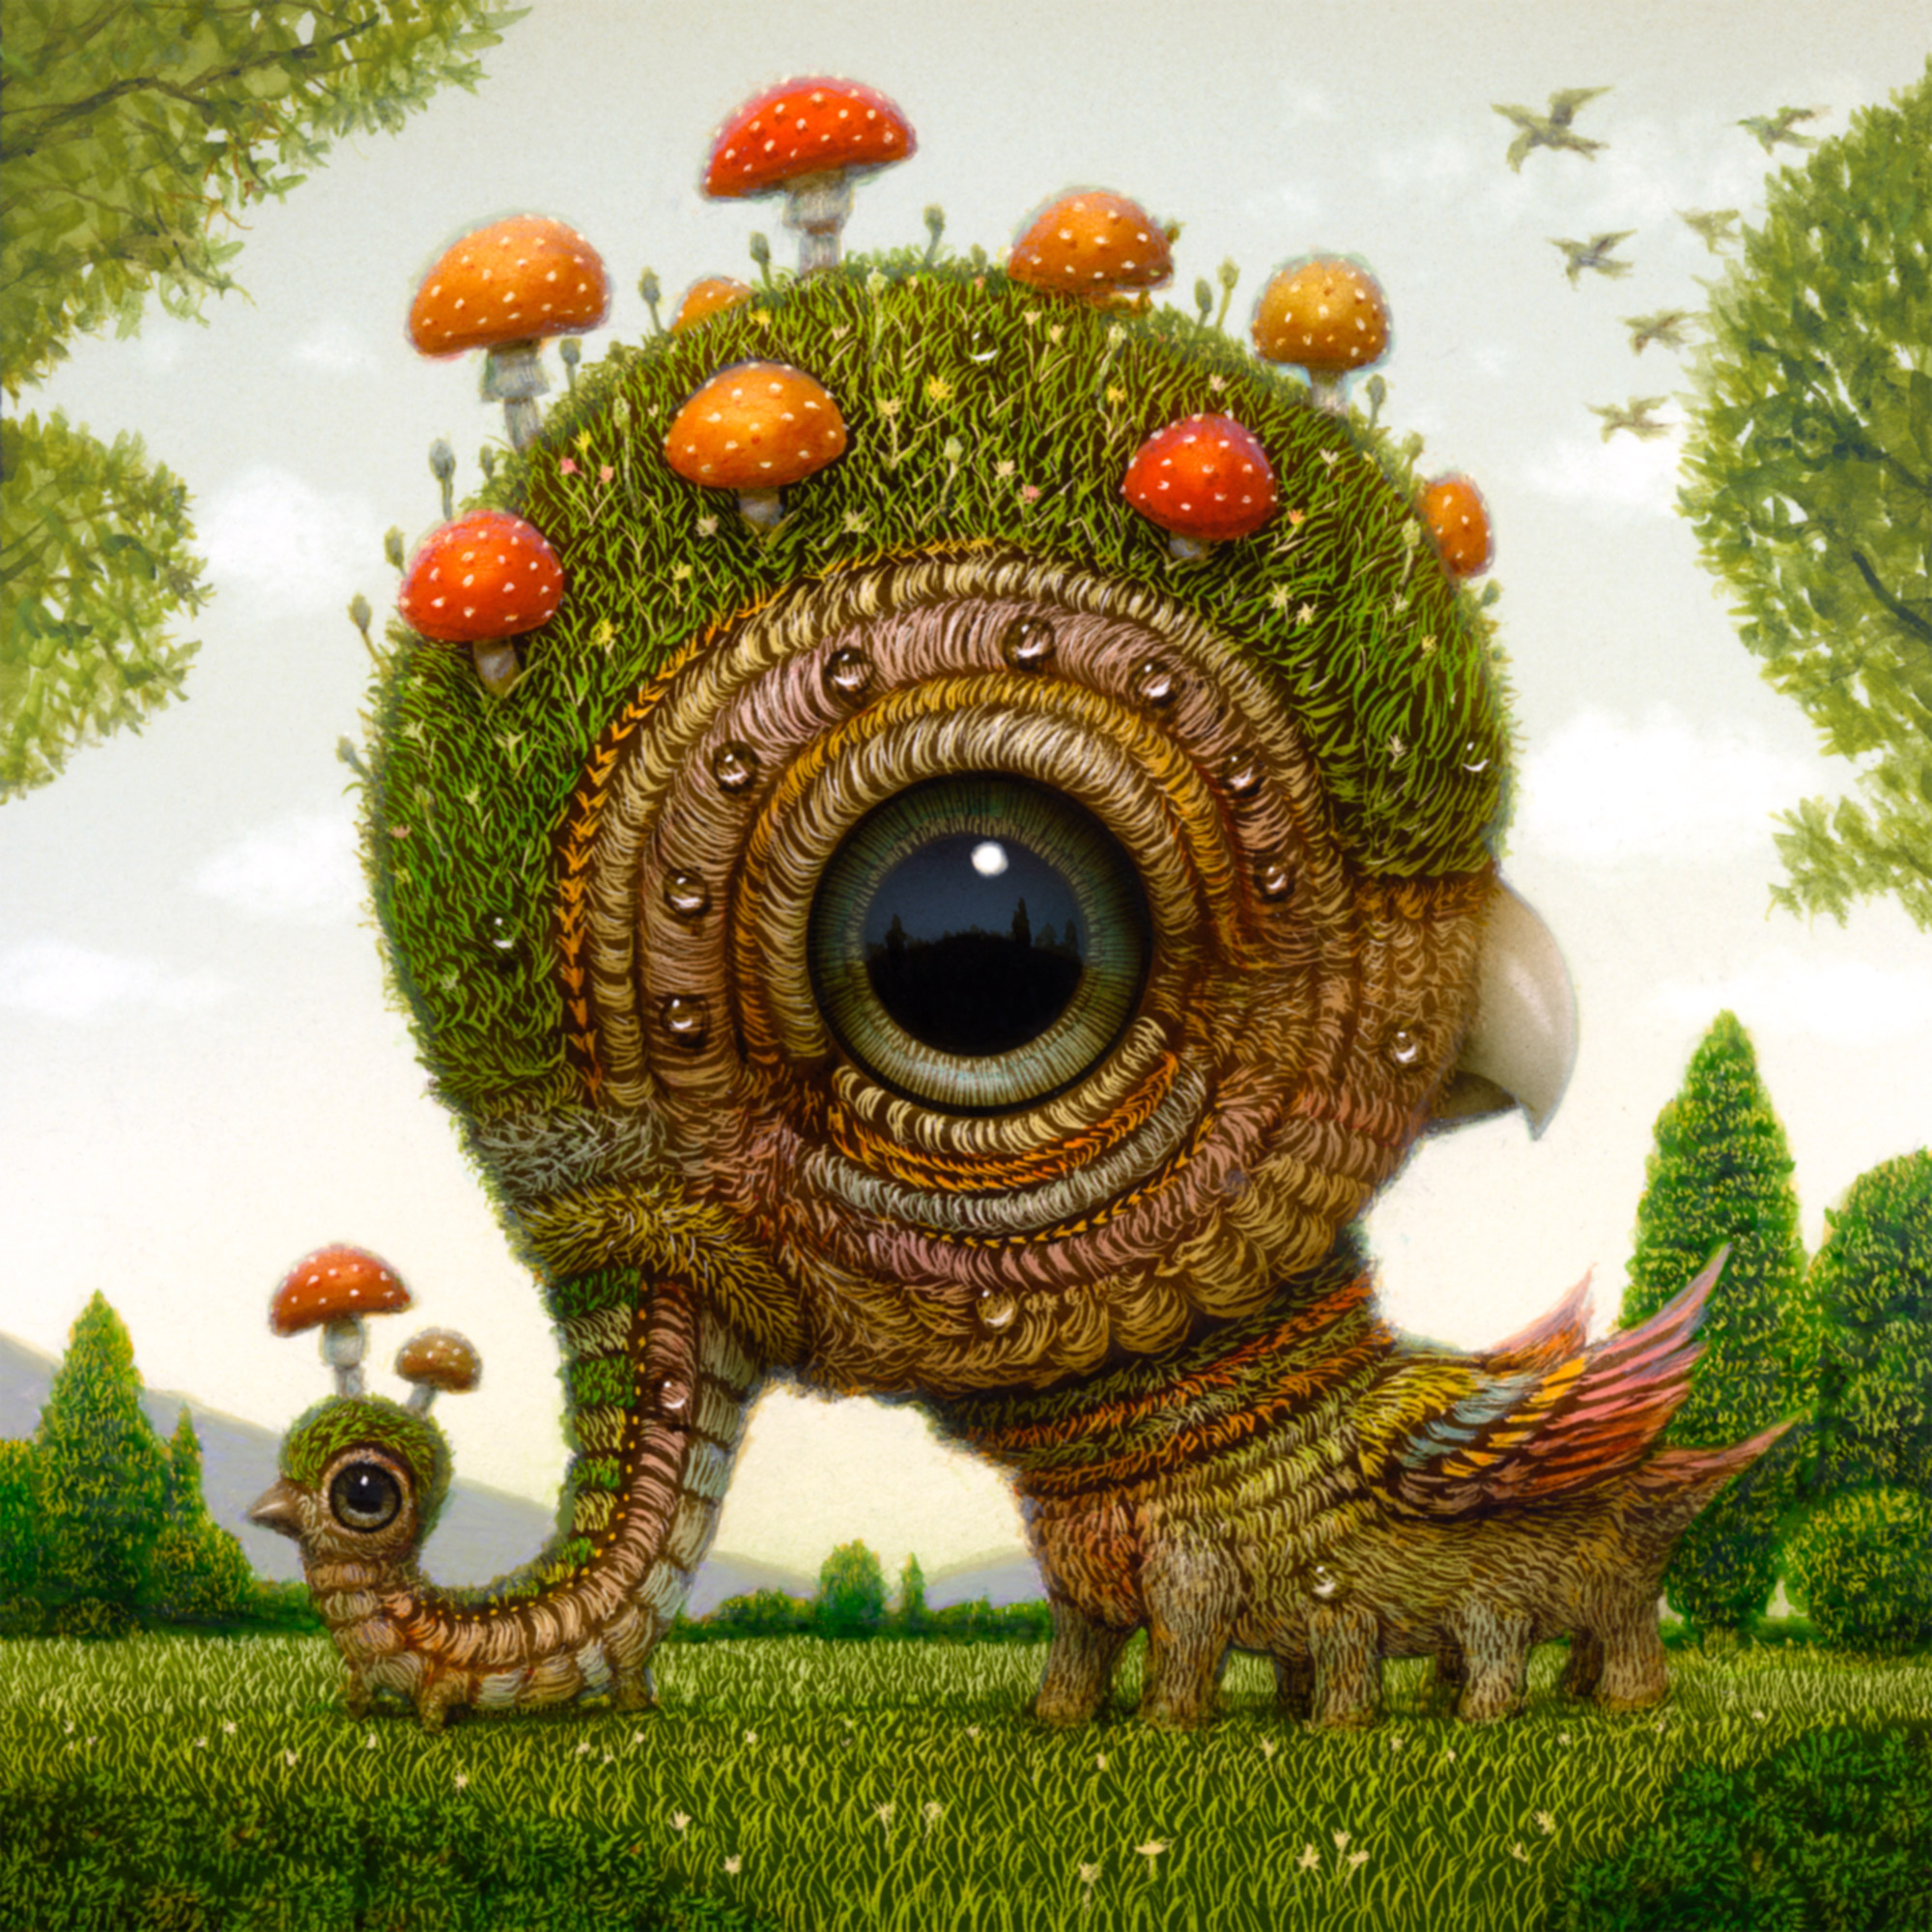 Bizarre Wide-Eyed Hybrids Reflect Imagined Landscapes in Naoto Hattori’s Miniature Paintings